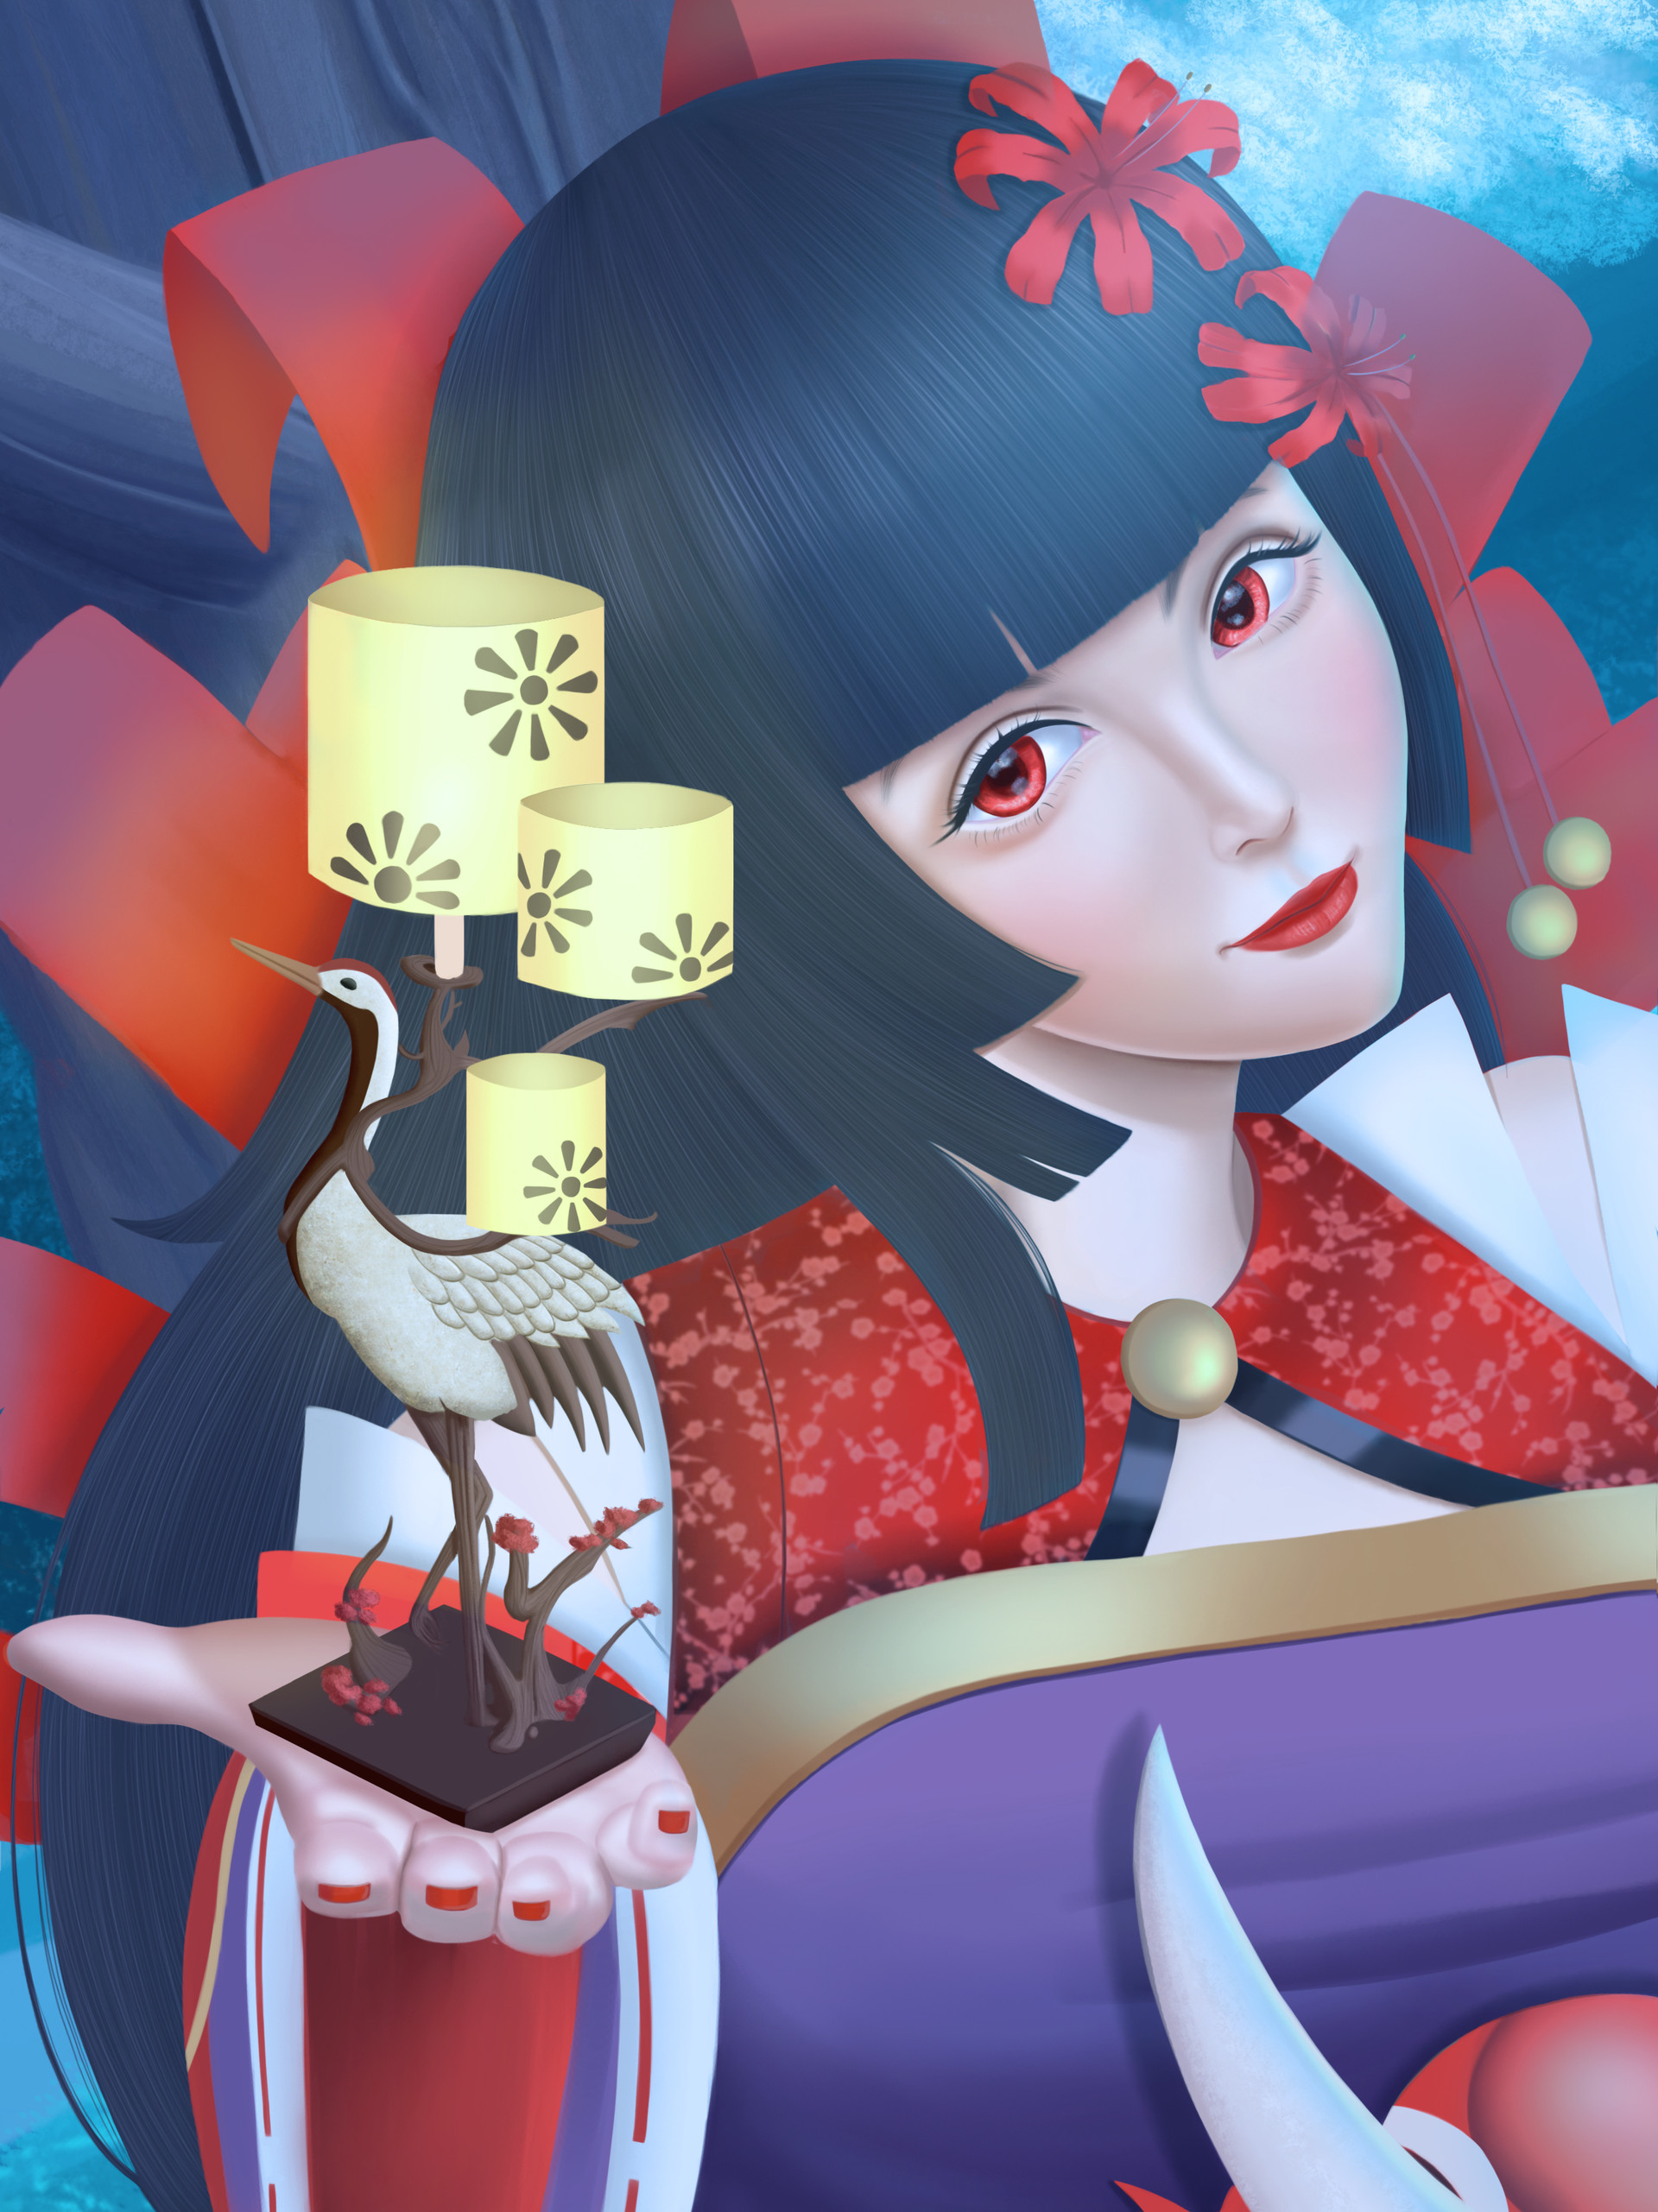 This is my entry for deviant art onmyoji fan art contest. 